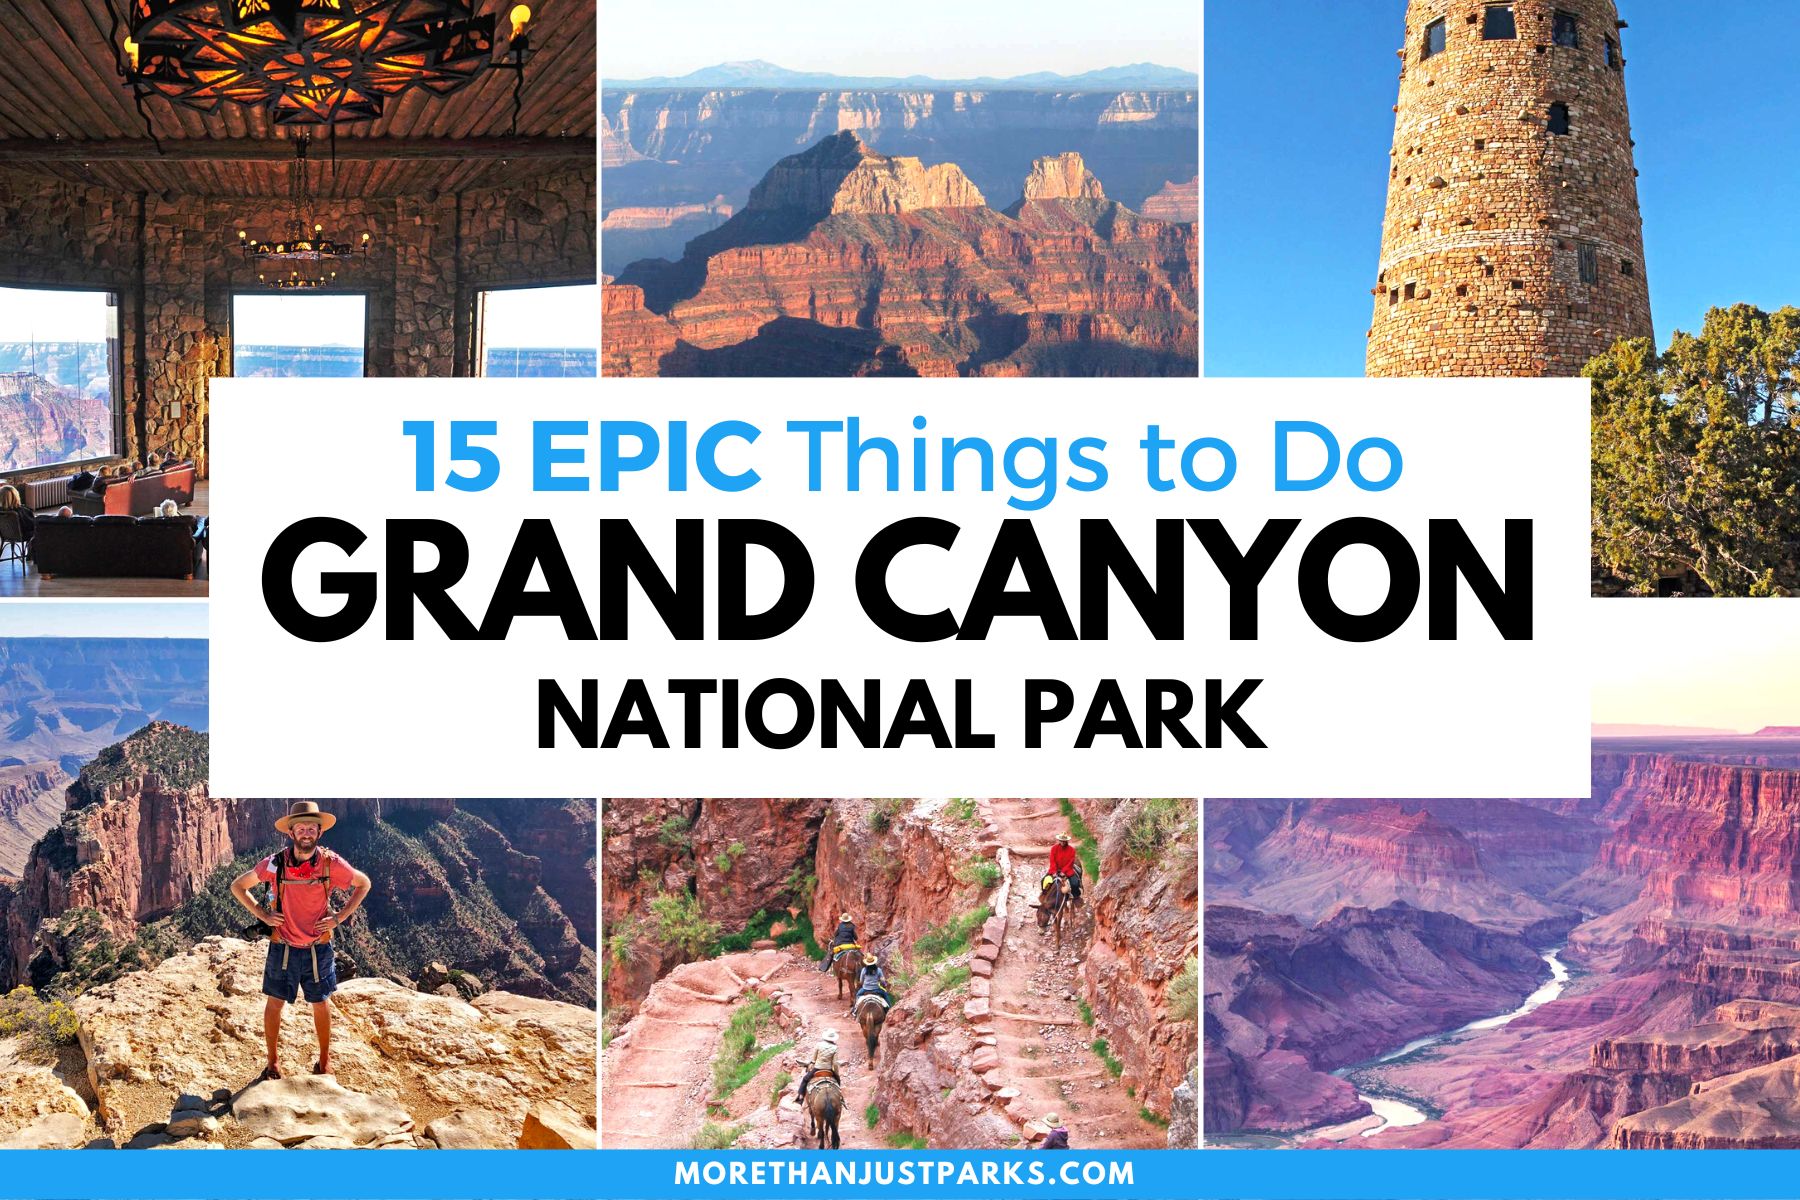 things to do grand canyon national park, things to do grand canyon arizona